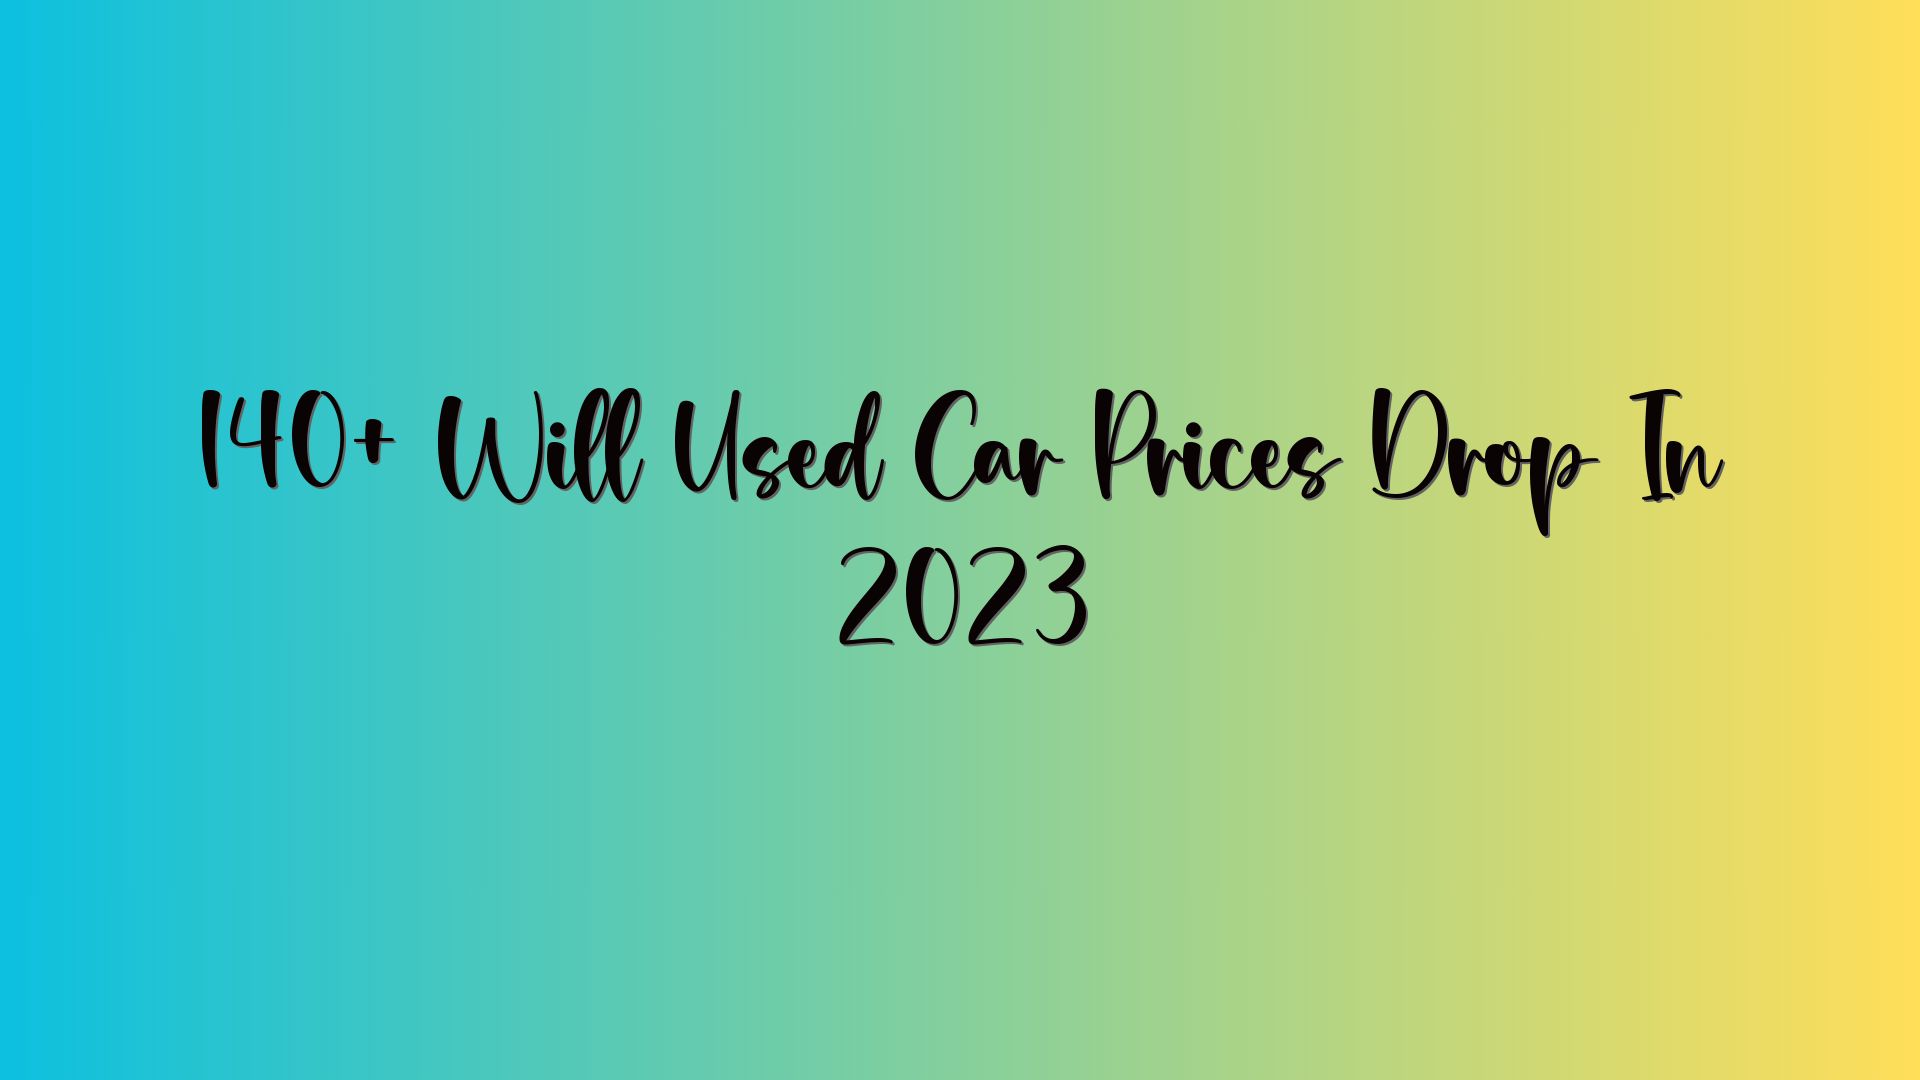 140+ Will Used Car Prices Drop In 2023